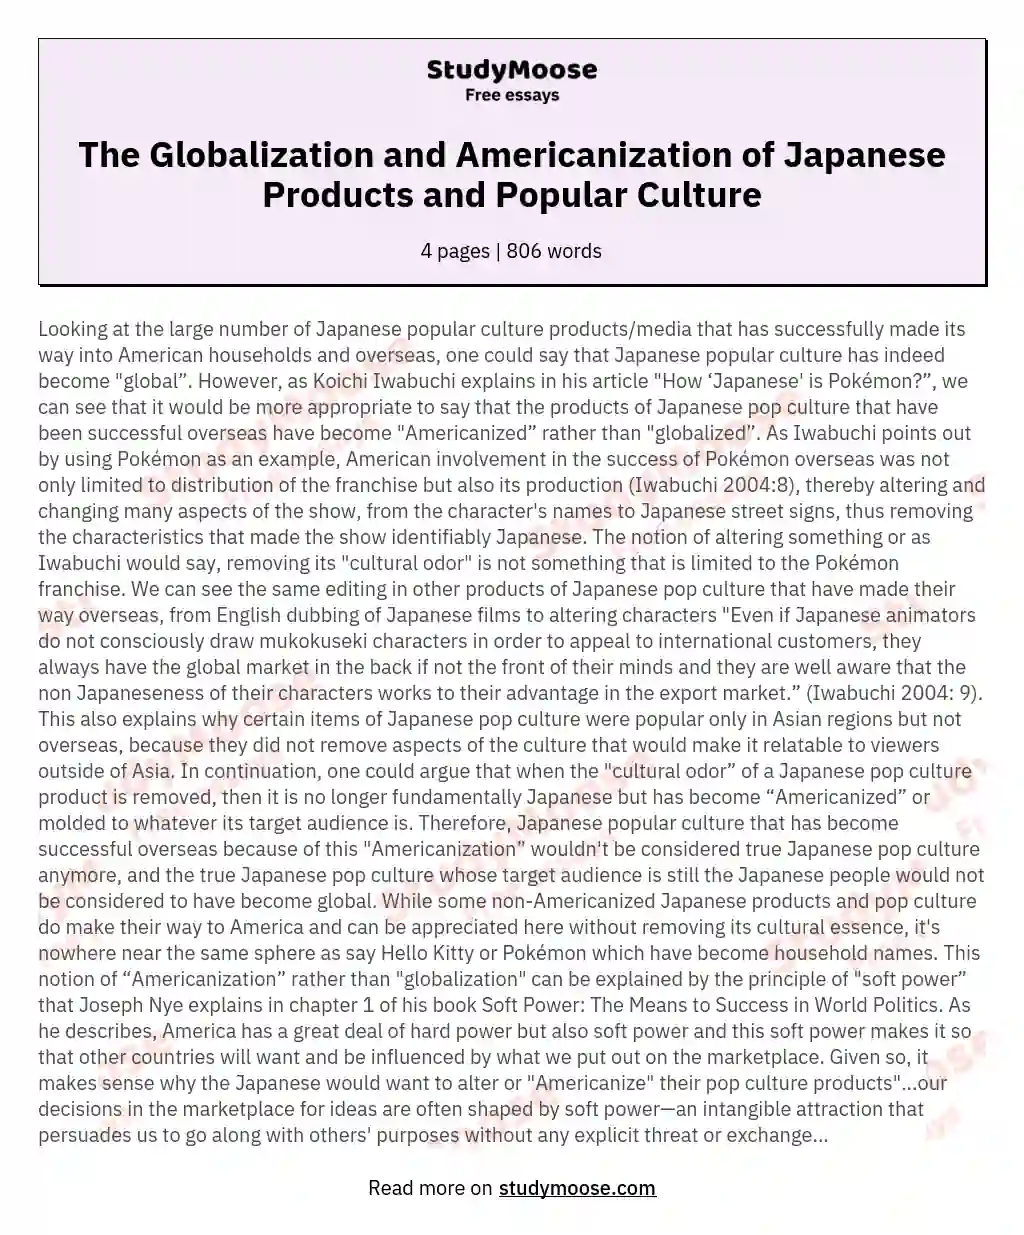 The Globalization and Americanization of Japanese Products and Popular Culture essay